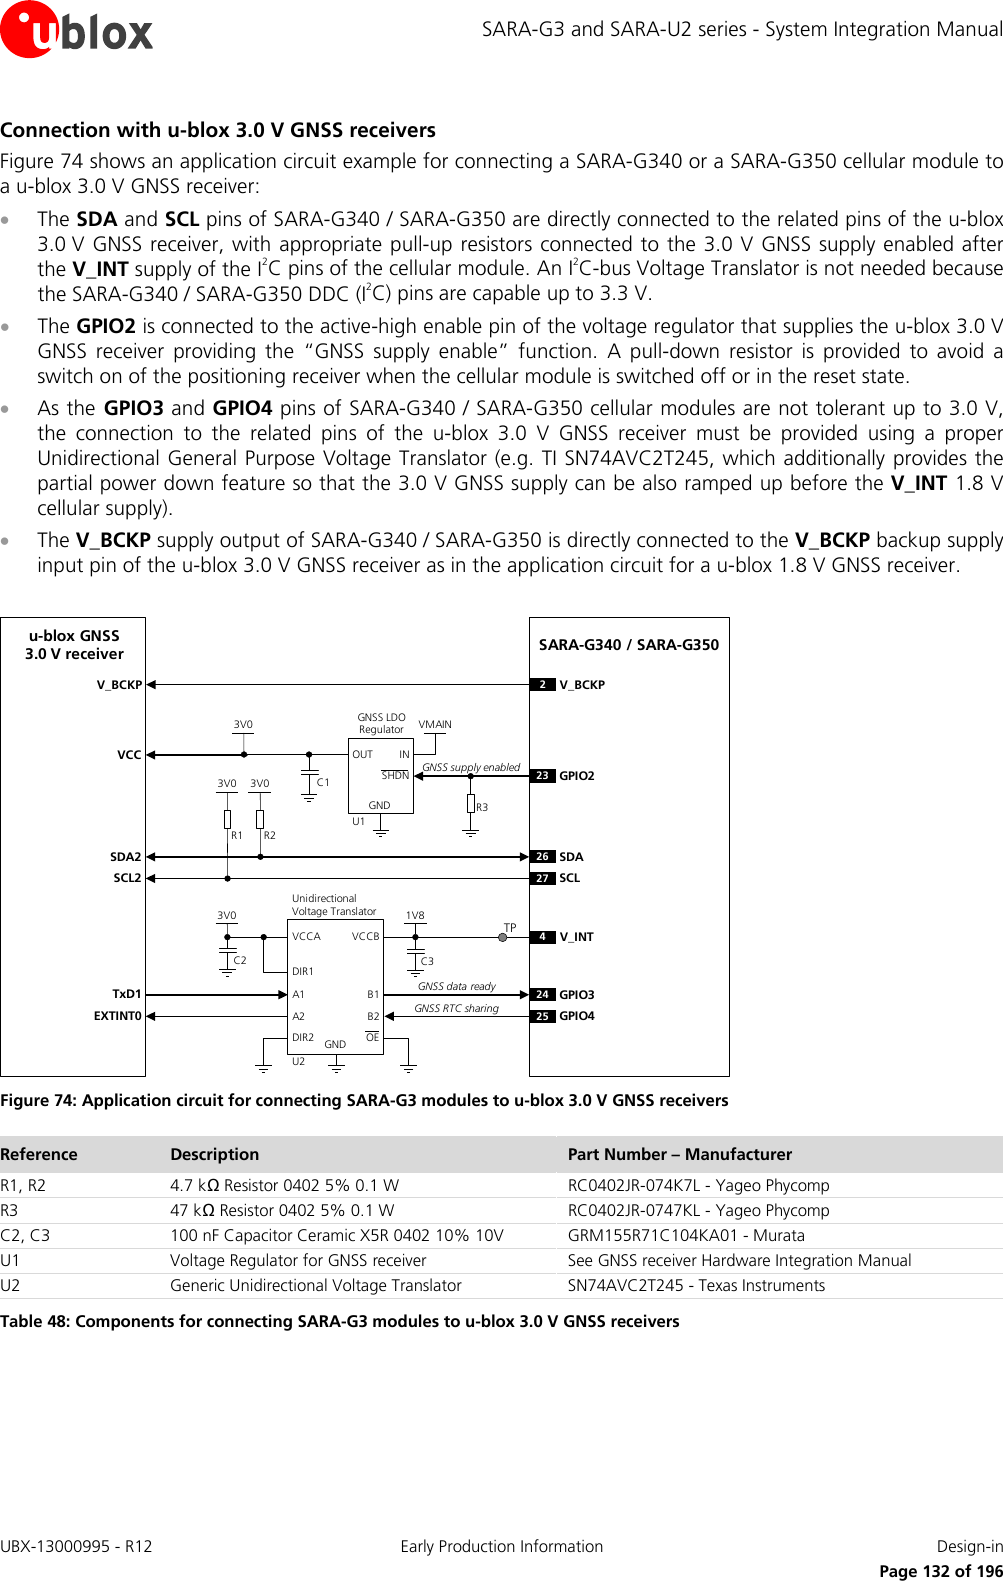 SARA-G3 and SARA-U2 series - System Integration Manual Connection with u-blox 3.0 V GNSS receivers Figure 74 shows an application circuit example for connecting a SARA-G340 or a SARA-G350 cellular module to a u-blox 3.0 V GNSS receiver: • The SDA and SCL pins of SARA-G340 / SARA-G350 are directly connected to the related pins of the u-blox 3.0 V GNSS receiver, with appropriate pull-up resistors connected to the 3.0 V GNSS supply enabled after the V_INT supply of the I2C pins of the cellular module. An I2C-bus Voltage Translator is not needed because the SARA-G340 / SARA-G350 DDC (I2C) pins are capable up to 3.3 V. • The GPIO2 is connected to the active-high enable pin of the voltage regulator that supplies the u-blox 3.0 V GNSS receiver providing the “GNSS supply enable” function. A pull-down resistor is provided to avoid a switch on of the positioning receiver when the cellular module is switched off or in the reset state. • As the GPIO3 and GPIO4 pins of SARA-G340 / SARA-G350 cellular modules are not tolerant up to 3.0 V, the connection to the related pins of the u-blox 3.0 V GNSS receiver must be provided using a proper Unidirectional General Purpose Voltage Translator (e.g. TI SN74AVC2T245, which additionally provides the partial power down feature so that the 3.0 V GNSS supply can be also ramped up before the V_INT 1.8 V cellular supply). • The V_BCKP supply output of SARA-G340 / SARA-G350 is directly connected to the V_BCKP backup supply input pin of the u-blox 3.0 V GNSS receiver as in the application circuit for a u-blox 1.8 V GNSS receiver.  SARA-G340 / SARA-G350R1INOUTGNDGNSS LDORegulatorSHDNu-blox GNSS3.0 V receiverSDA2SCL2R23V0 3V0VMAIN3V0U123GPIO2SDASCLC12627VCCR3V_BCKP V_BCKP224GPIO325GPIO41V8B1 A1GNDU2B2A2VCCBVCCAUnidirectionalVoltage TranslatorC2 C33V0TxD1EXTINT04V_INTDIR1DIR2 OEGNSS data  readyGNSS RTC sharingTPGNSS supply enabled Figure 74: Application circuit for connecting SARA-G3 modules to u-blox 3.0 V GNSS receivers Reference Description Part Number – Manufacturer R1, R2 4.7 kΩ Resistor 0402 5% 0.1 W  RC0402JR-074K7L - Yageo Phycomp R3 47 kΩ Resistor 0402 5% 0.1 W  RC0402JR-0747KL - Yageo Phycomp C2, C3 100 nF Capacitor Ceramic X5R 0402 10% 10V GRM155R71C104KA01 - Murata U1 Voltage Regulator for GNSS receiver See GNSS receiver Hardware Integration Manual U2  Generic Unidirectional Voltage Translator SN74AVC2T245 - Texas Instruments Table 48: Components for connecting SARA-G3 modules to u-blox 3.0 V GNSS receivers  UBX-13000995 - R12 Early Production Information Design-in     Page 132 of 196 